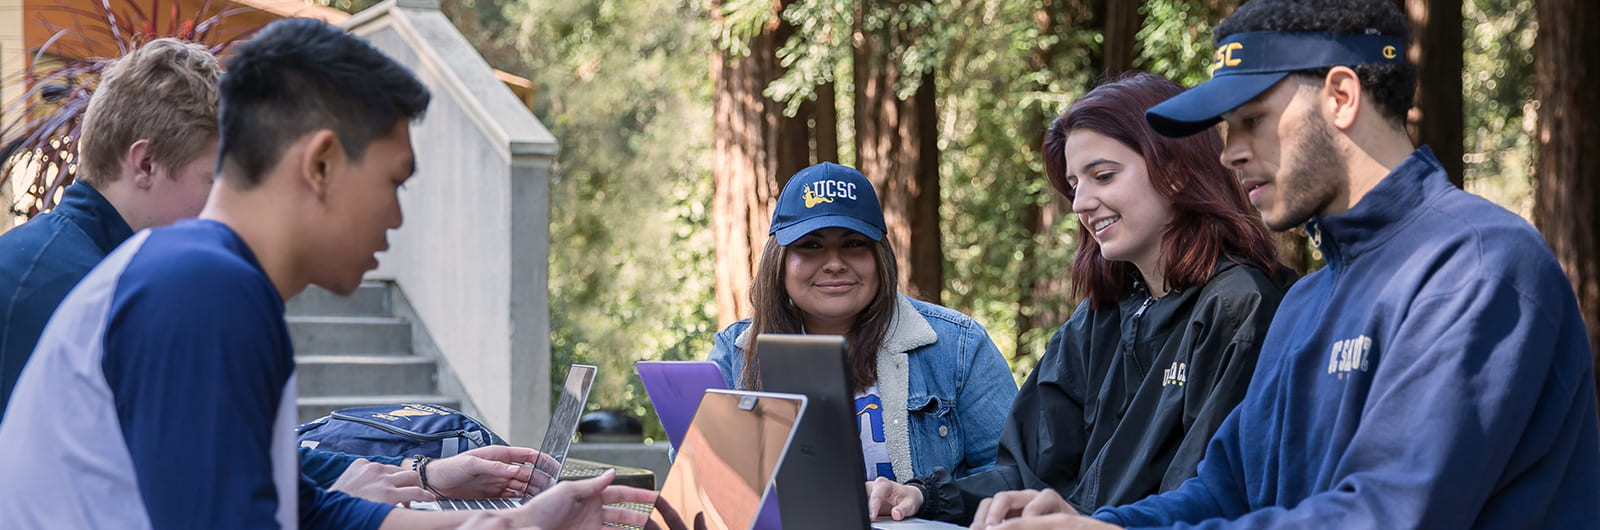 A group of five students sit using their laptops at a table in the redwoods. They are wearing UC Santa Cruz hats and jackets.